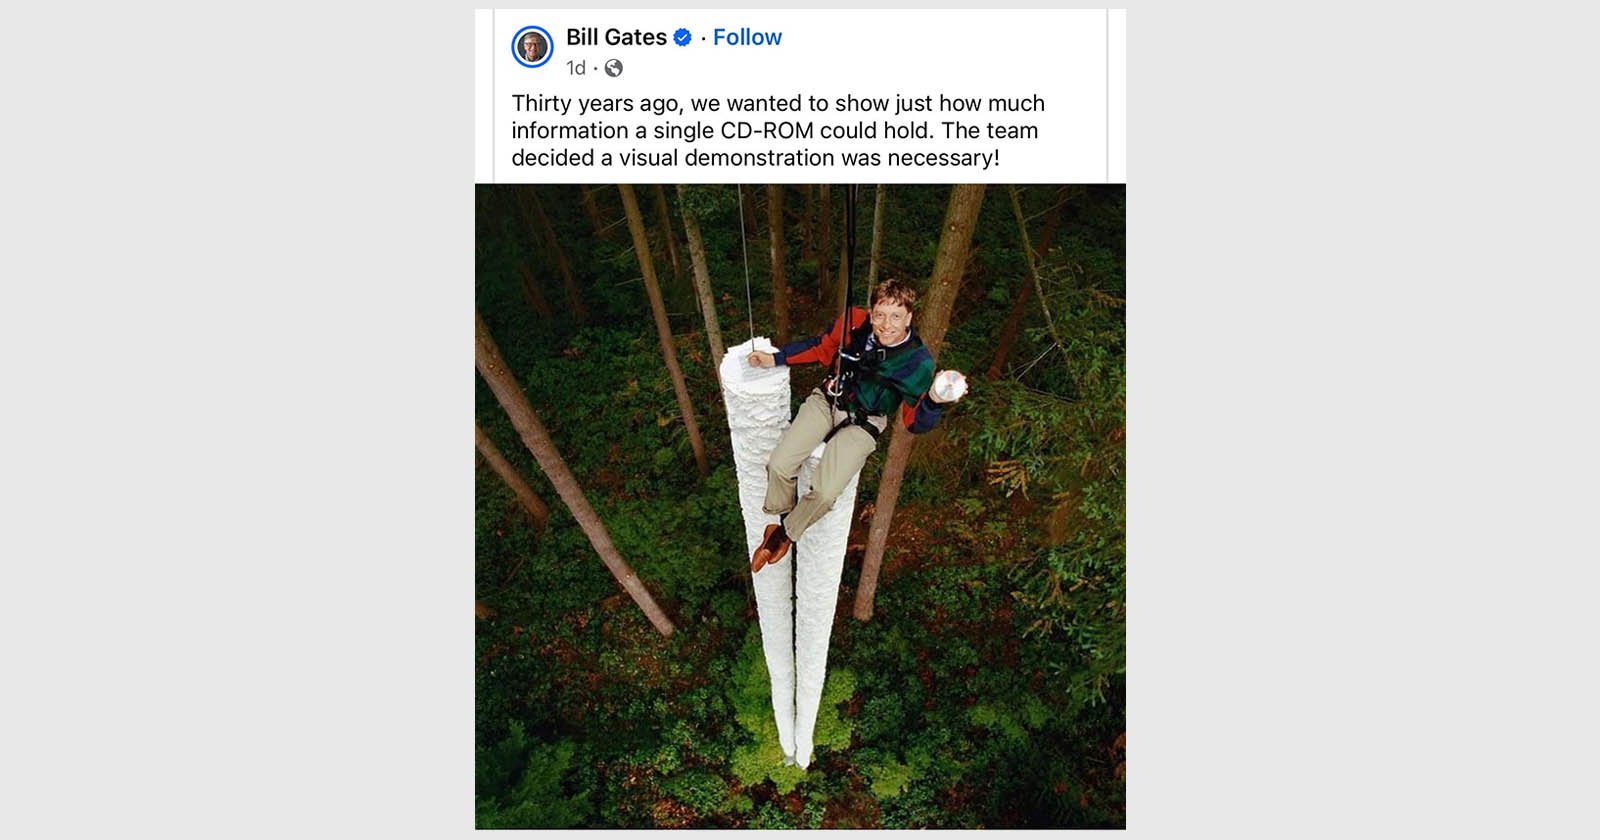 Bill Gates Used My Photo Without Permission and Then Made it Right